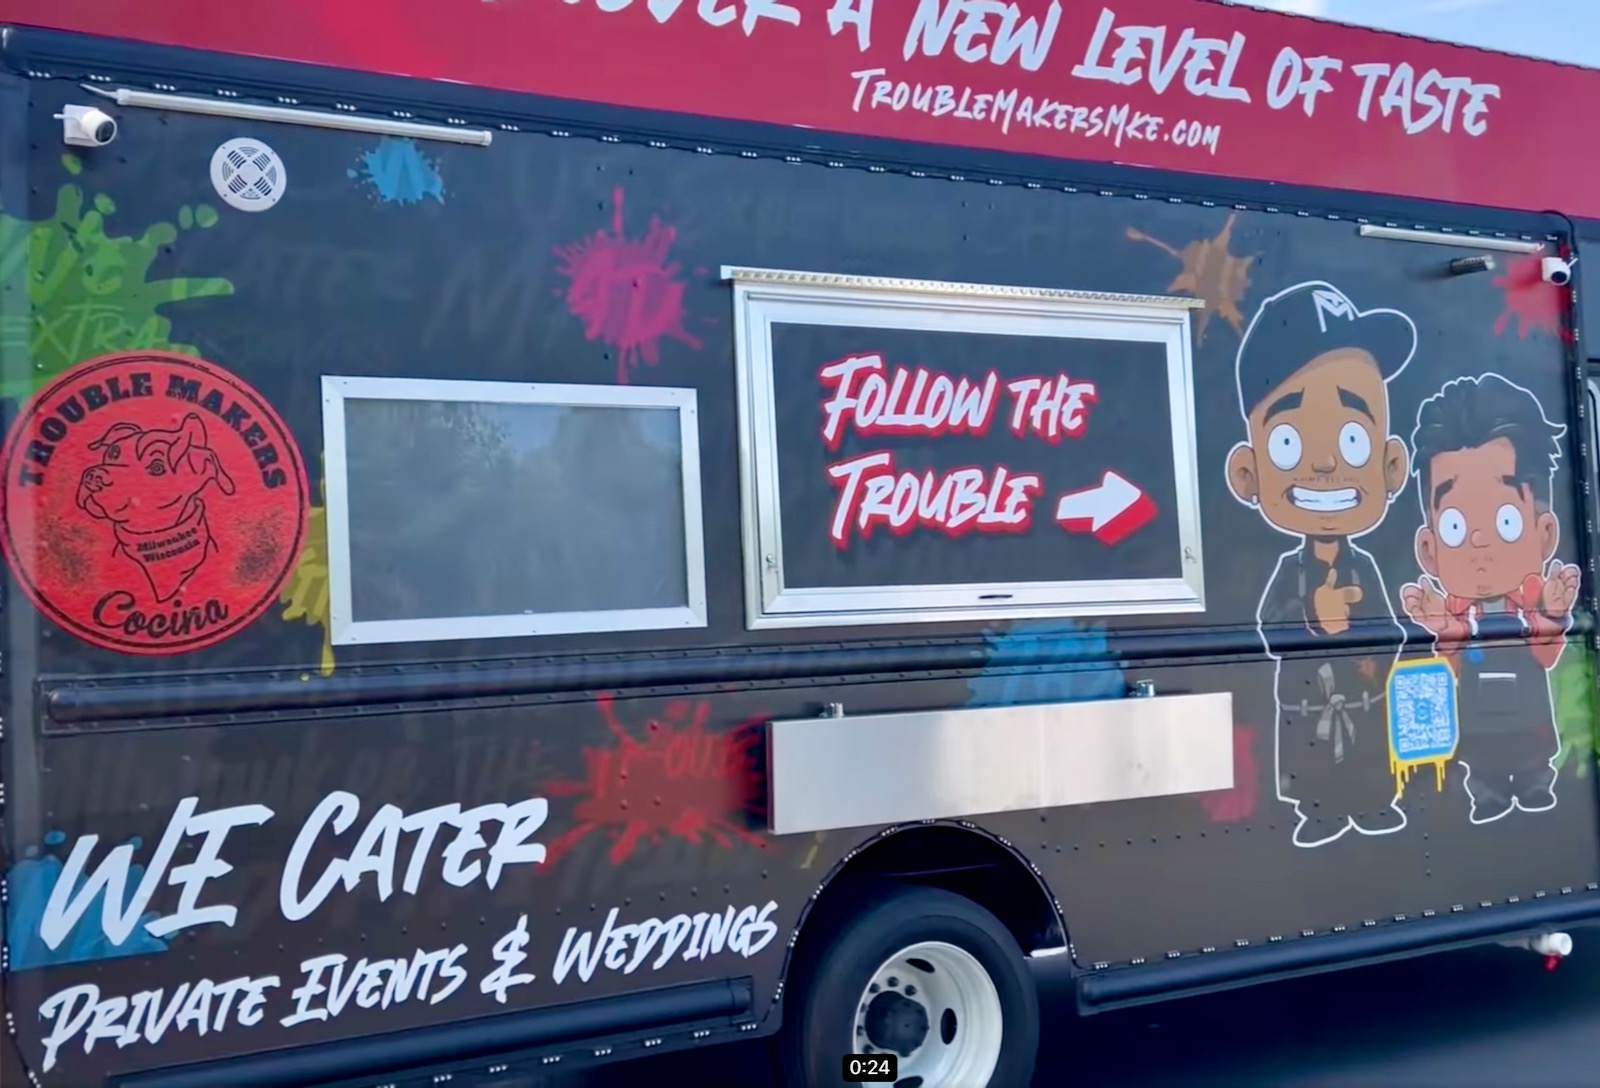 Follow the Trouble - food truck